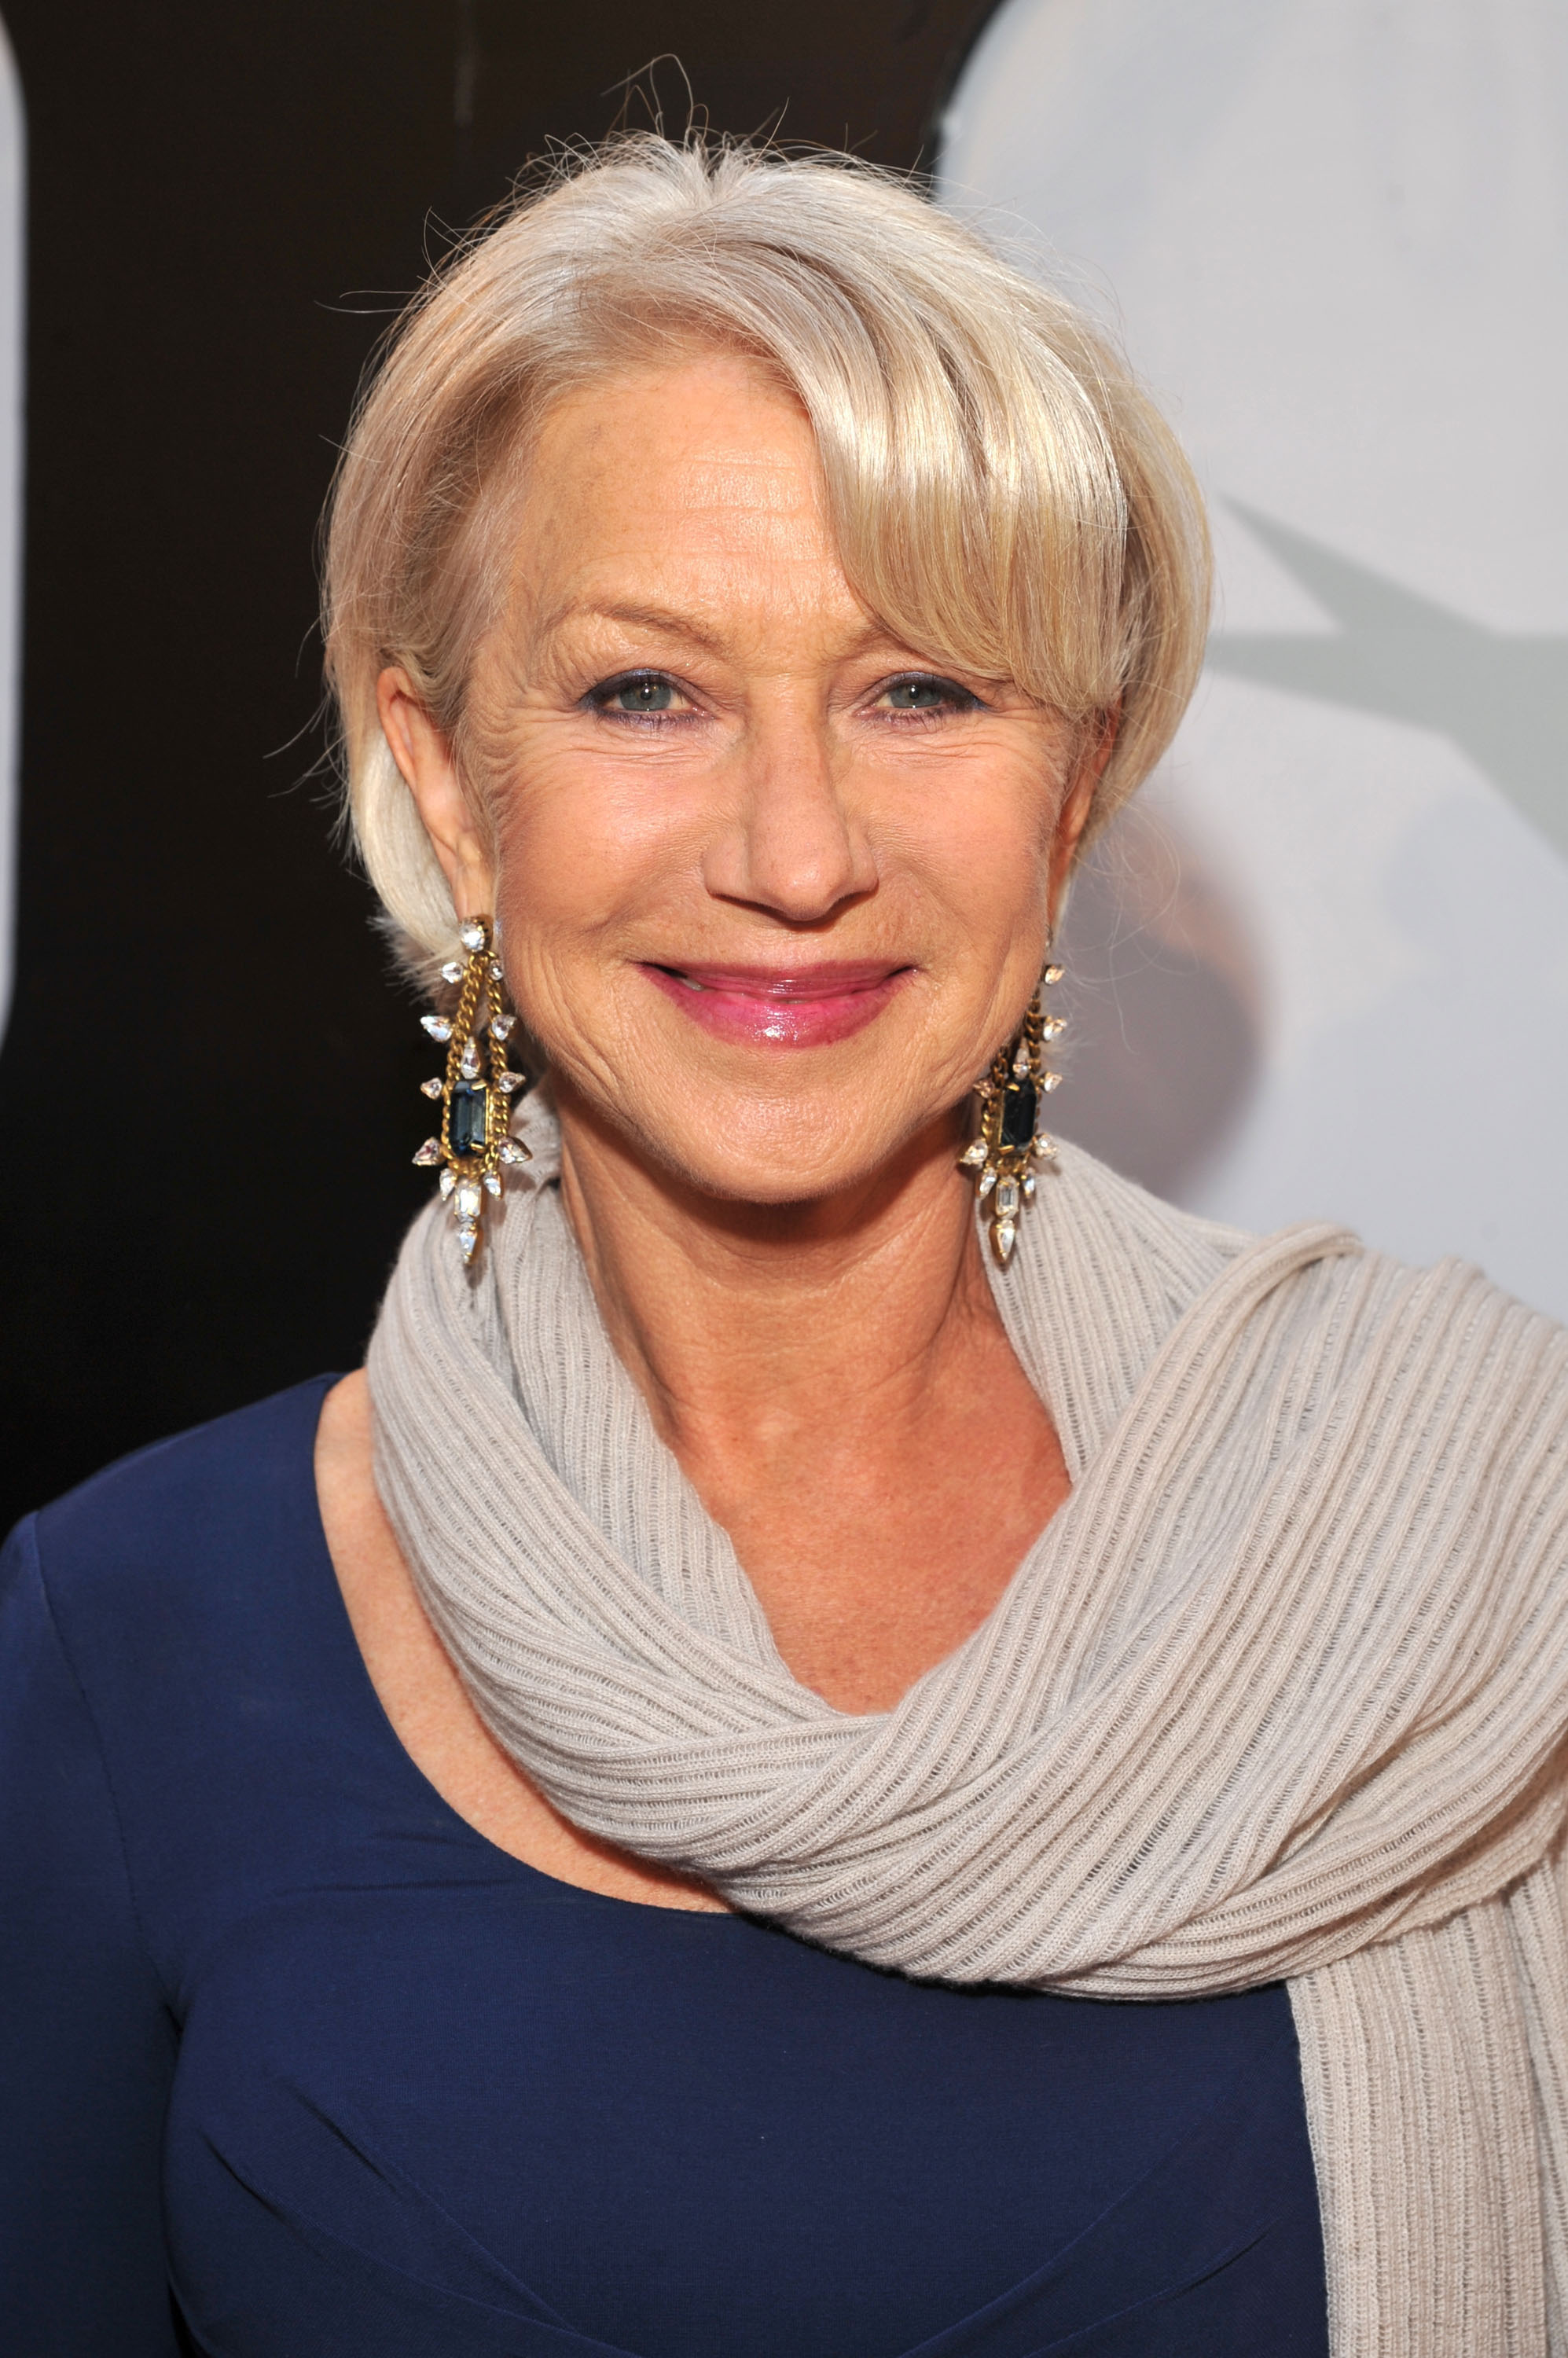 Helen Mirren at AFI's 39th Annual Achievement Awards on June 9, 2011 | Source: Getty Images